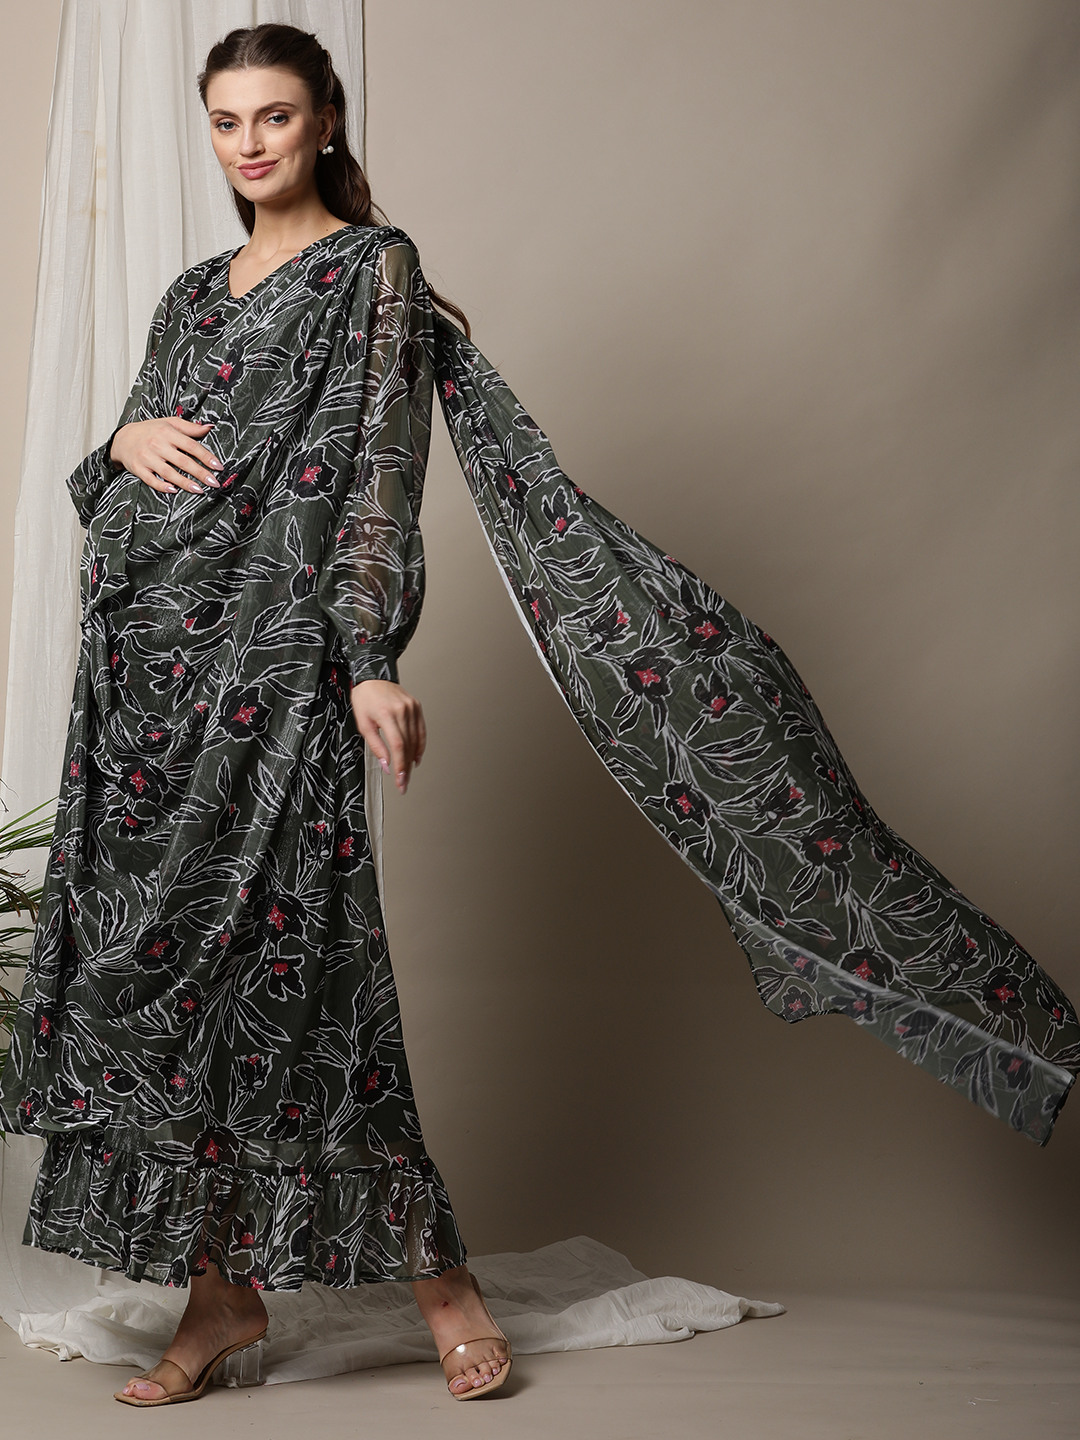 Pregnancy Photoshoot in Saree - Floral Print | Wobbly Walk